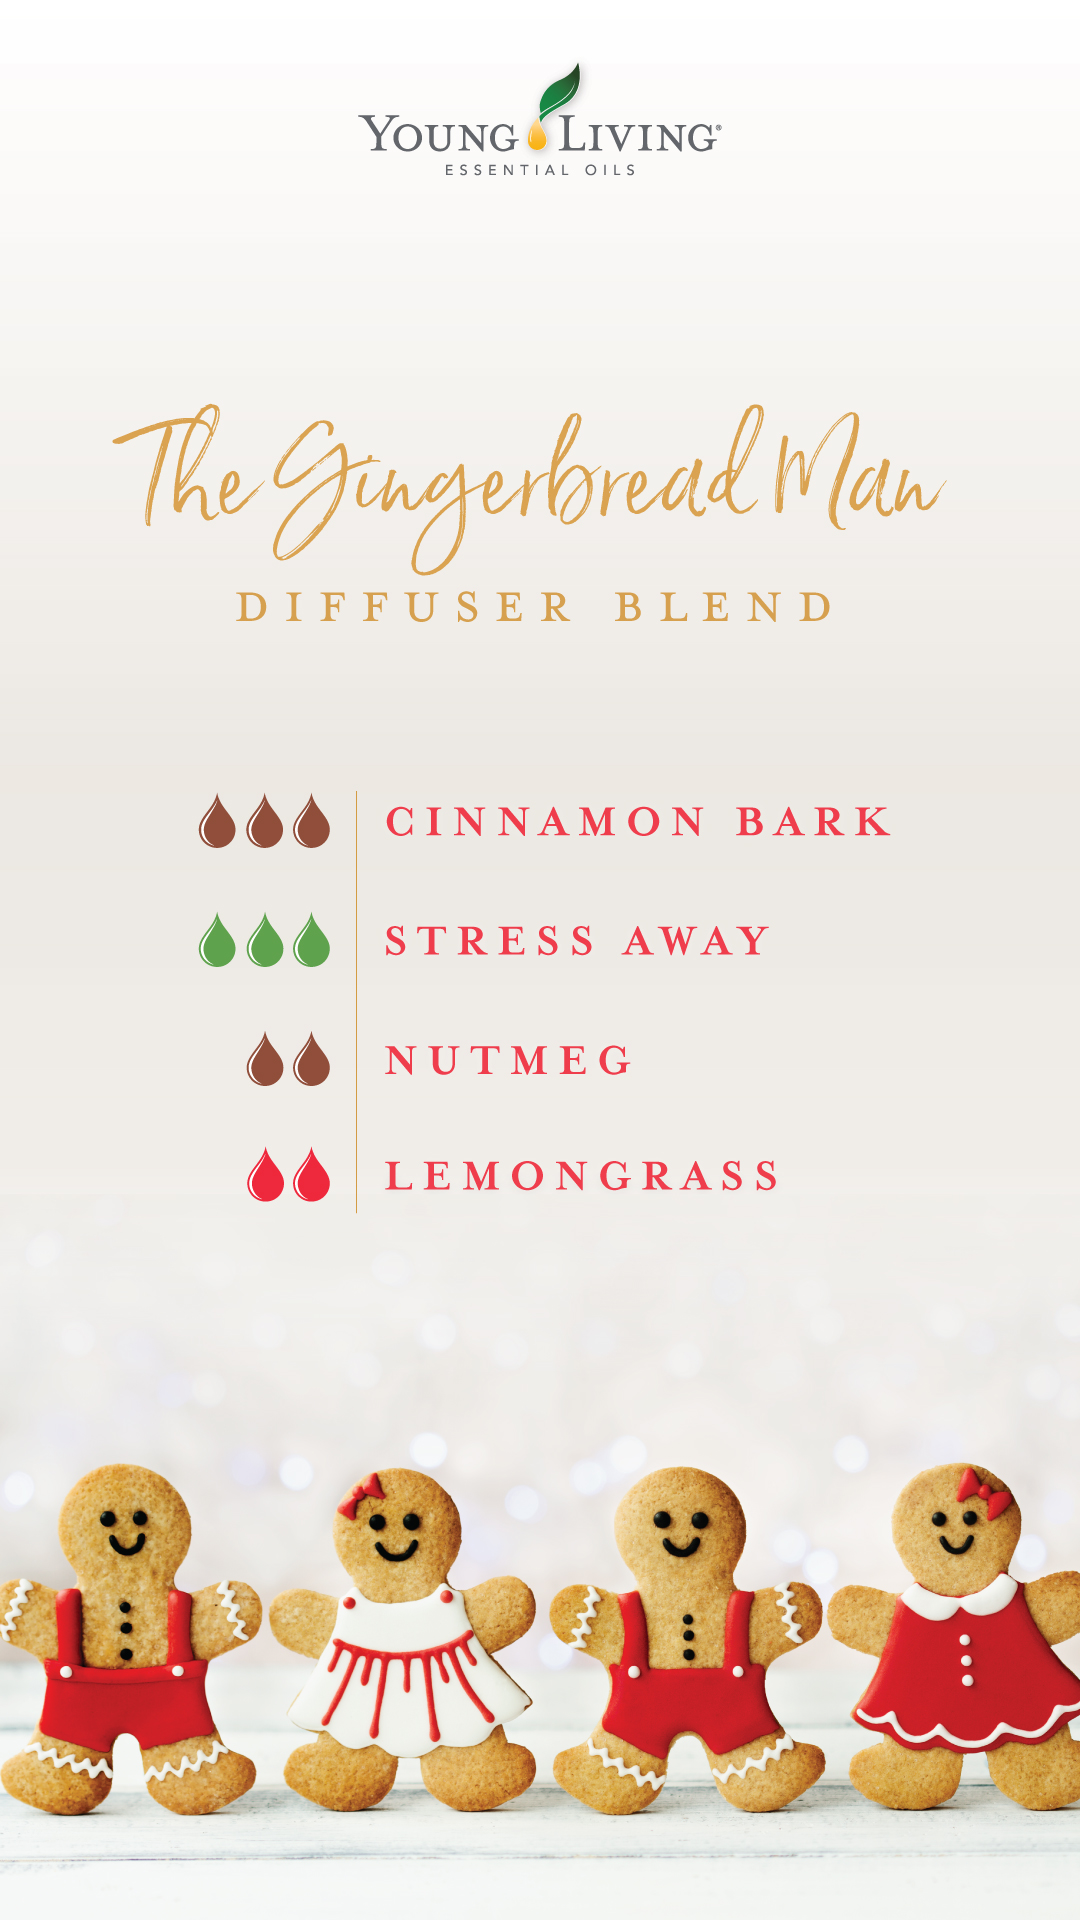 The Gingerbread Man diffuser blend